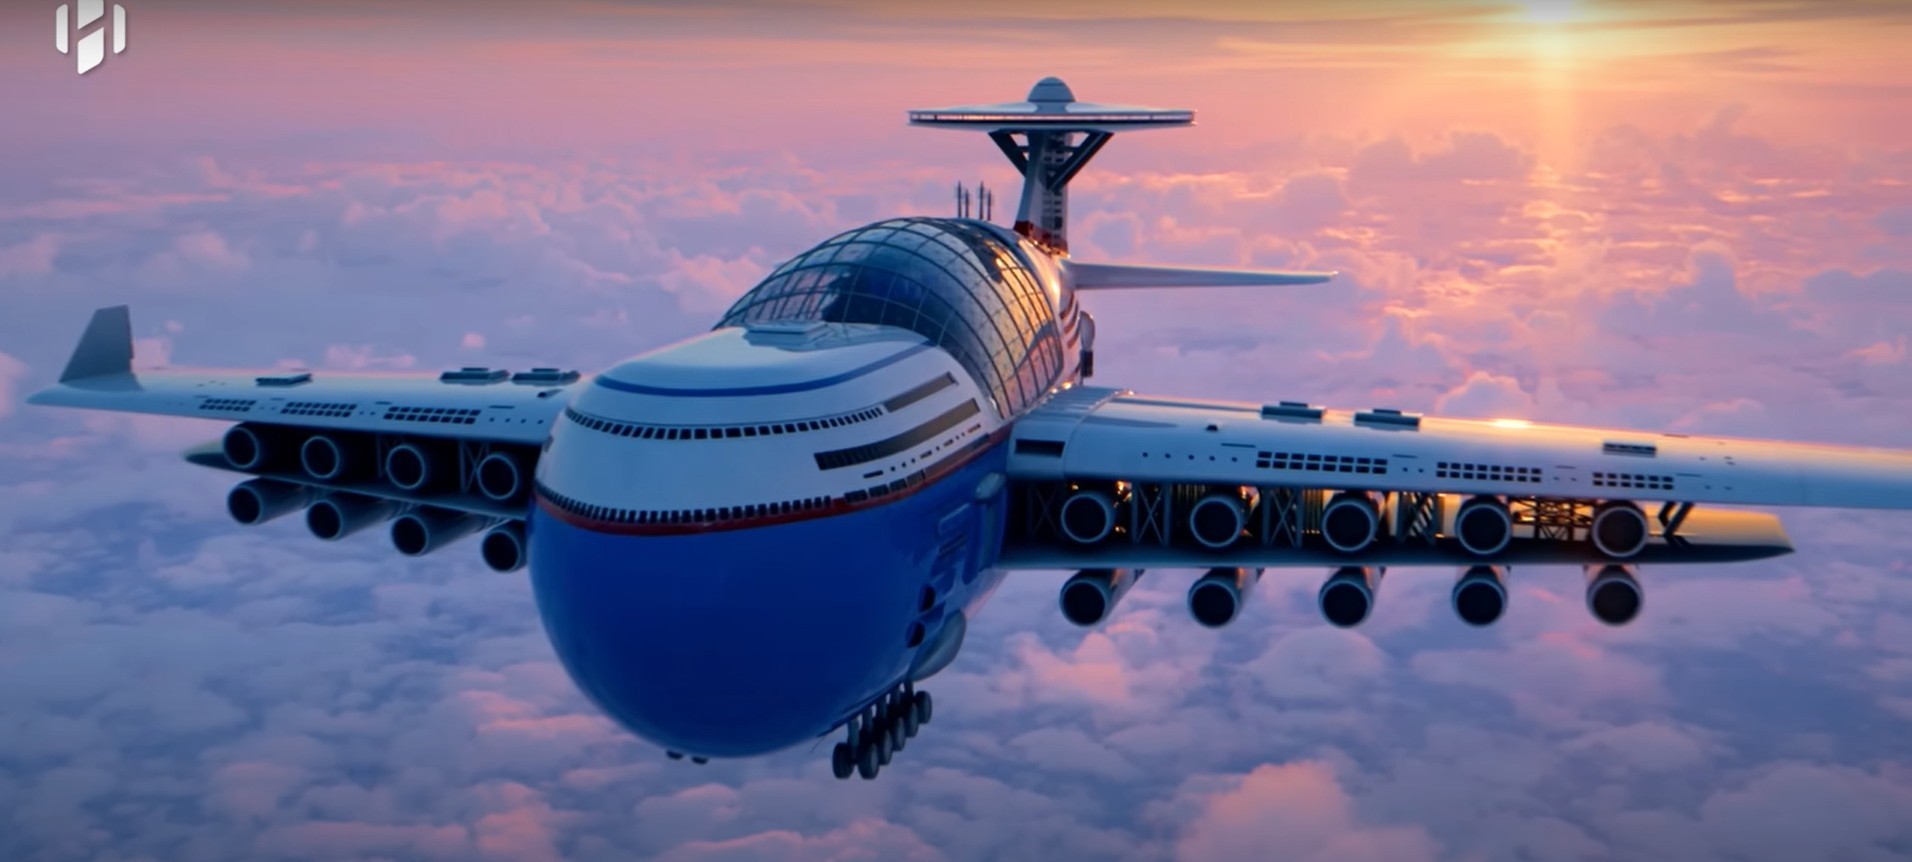 On Board Sky Cruise, the Gigantic 5,000-Person Airplane Hotel Running ...